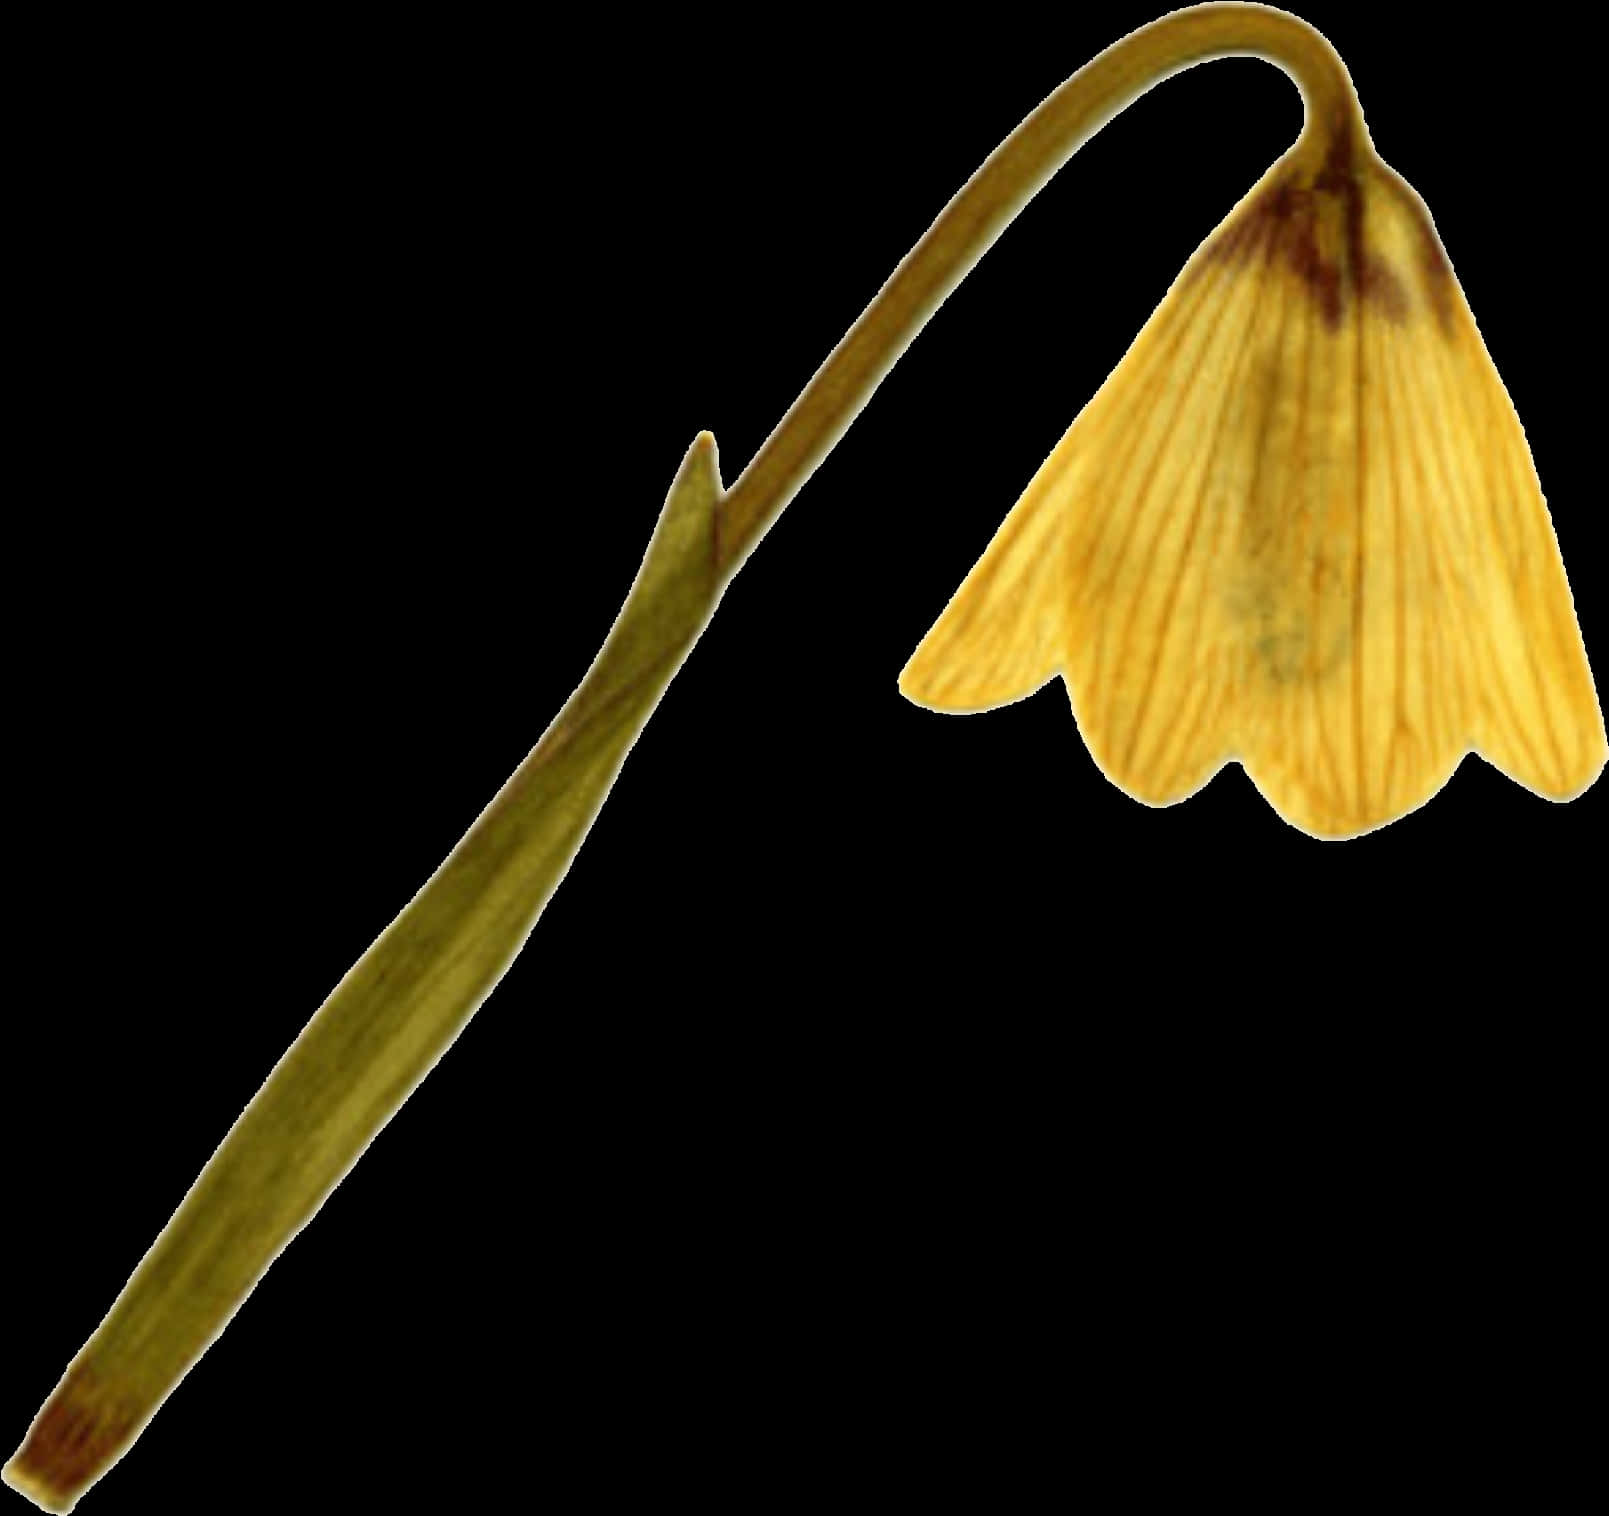 A Yellow Flower With A Long Stem